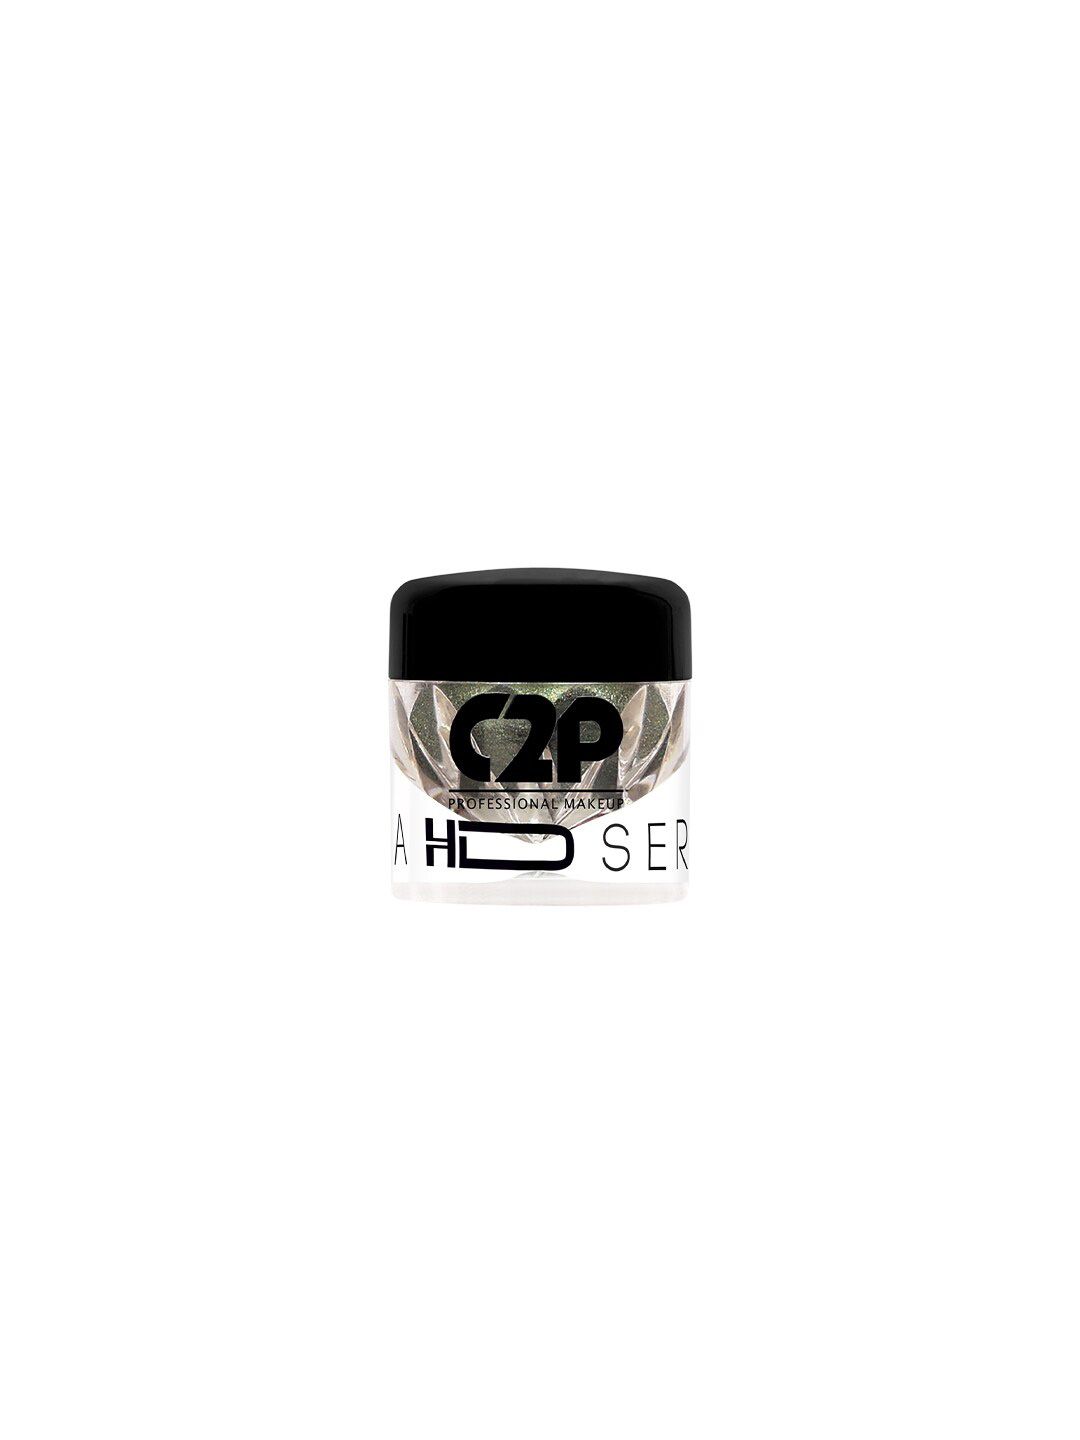 C2P PROFESSIONAL MAKEUP HD Loose Precious Pigments - Game Changer 171 2 gm Price in India